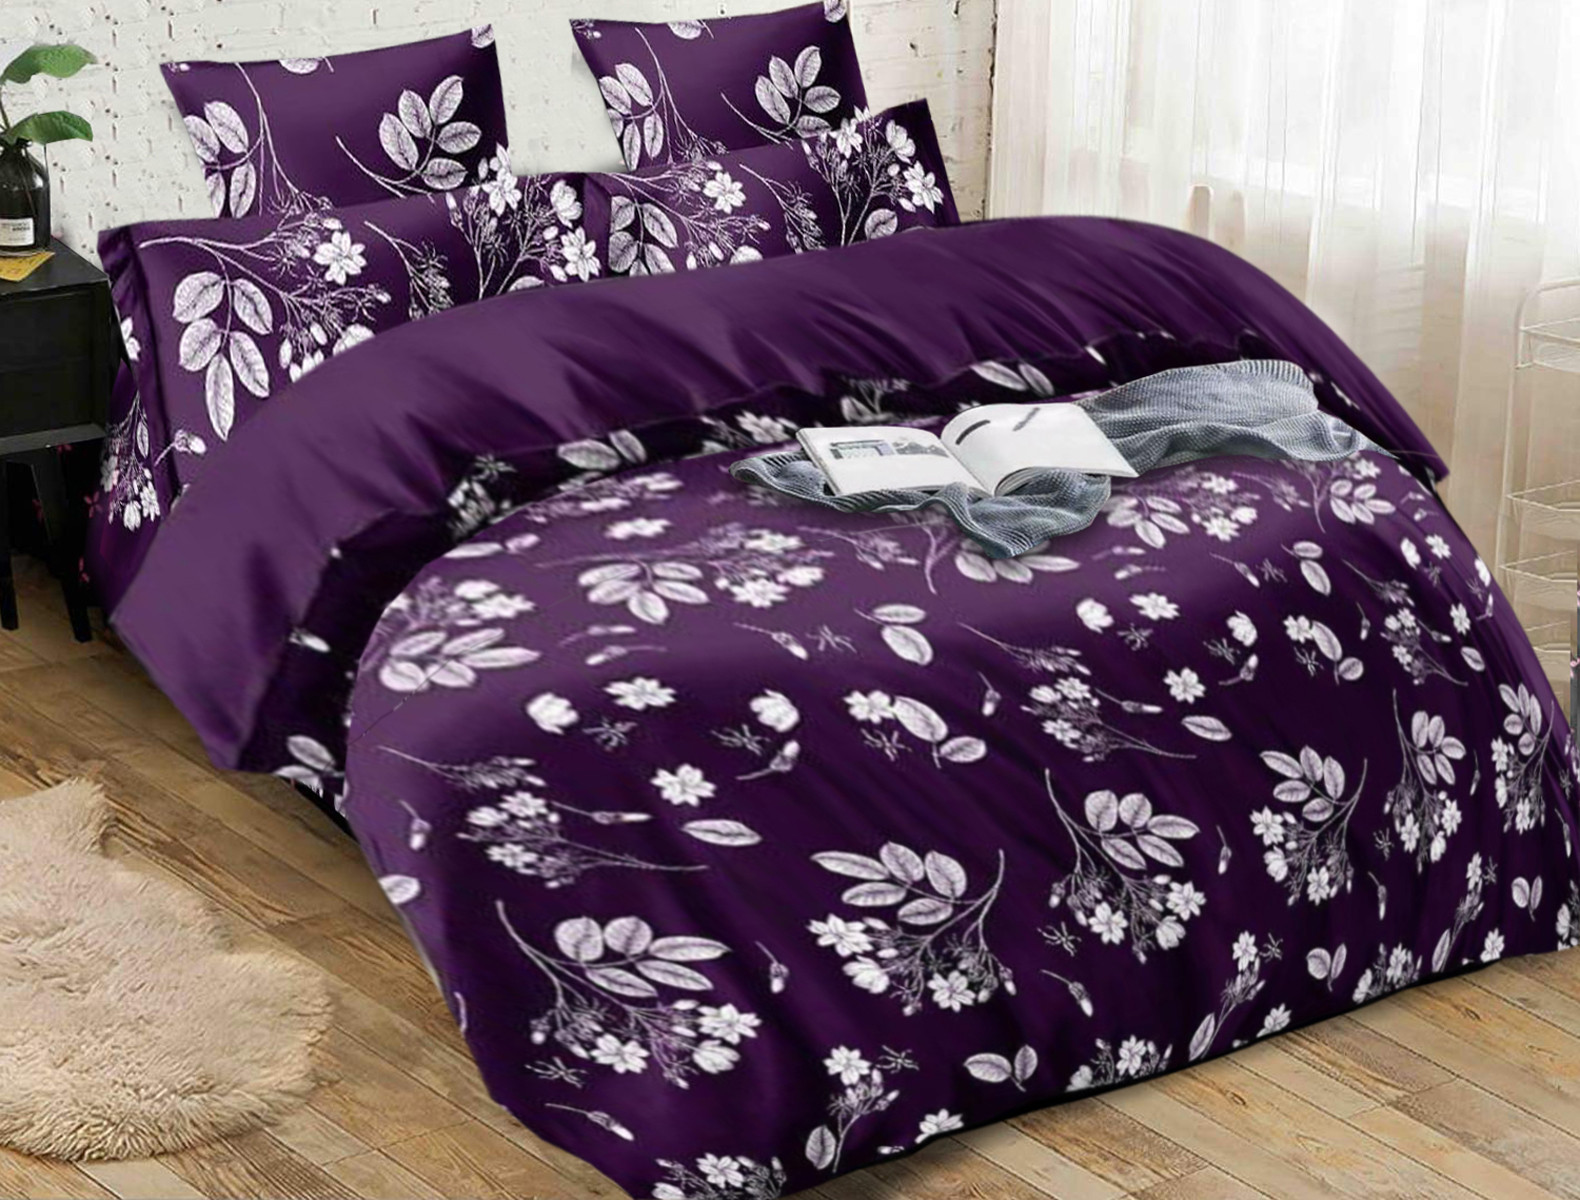 Kuber Industries Floral Print Glace Cotton AC Comforter King Size Bed Comforter, Double Bed Sheet, 2 Pillow Cover (Purple, 90x100 Inches)-Set of 4 Pieces